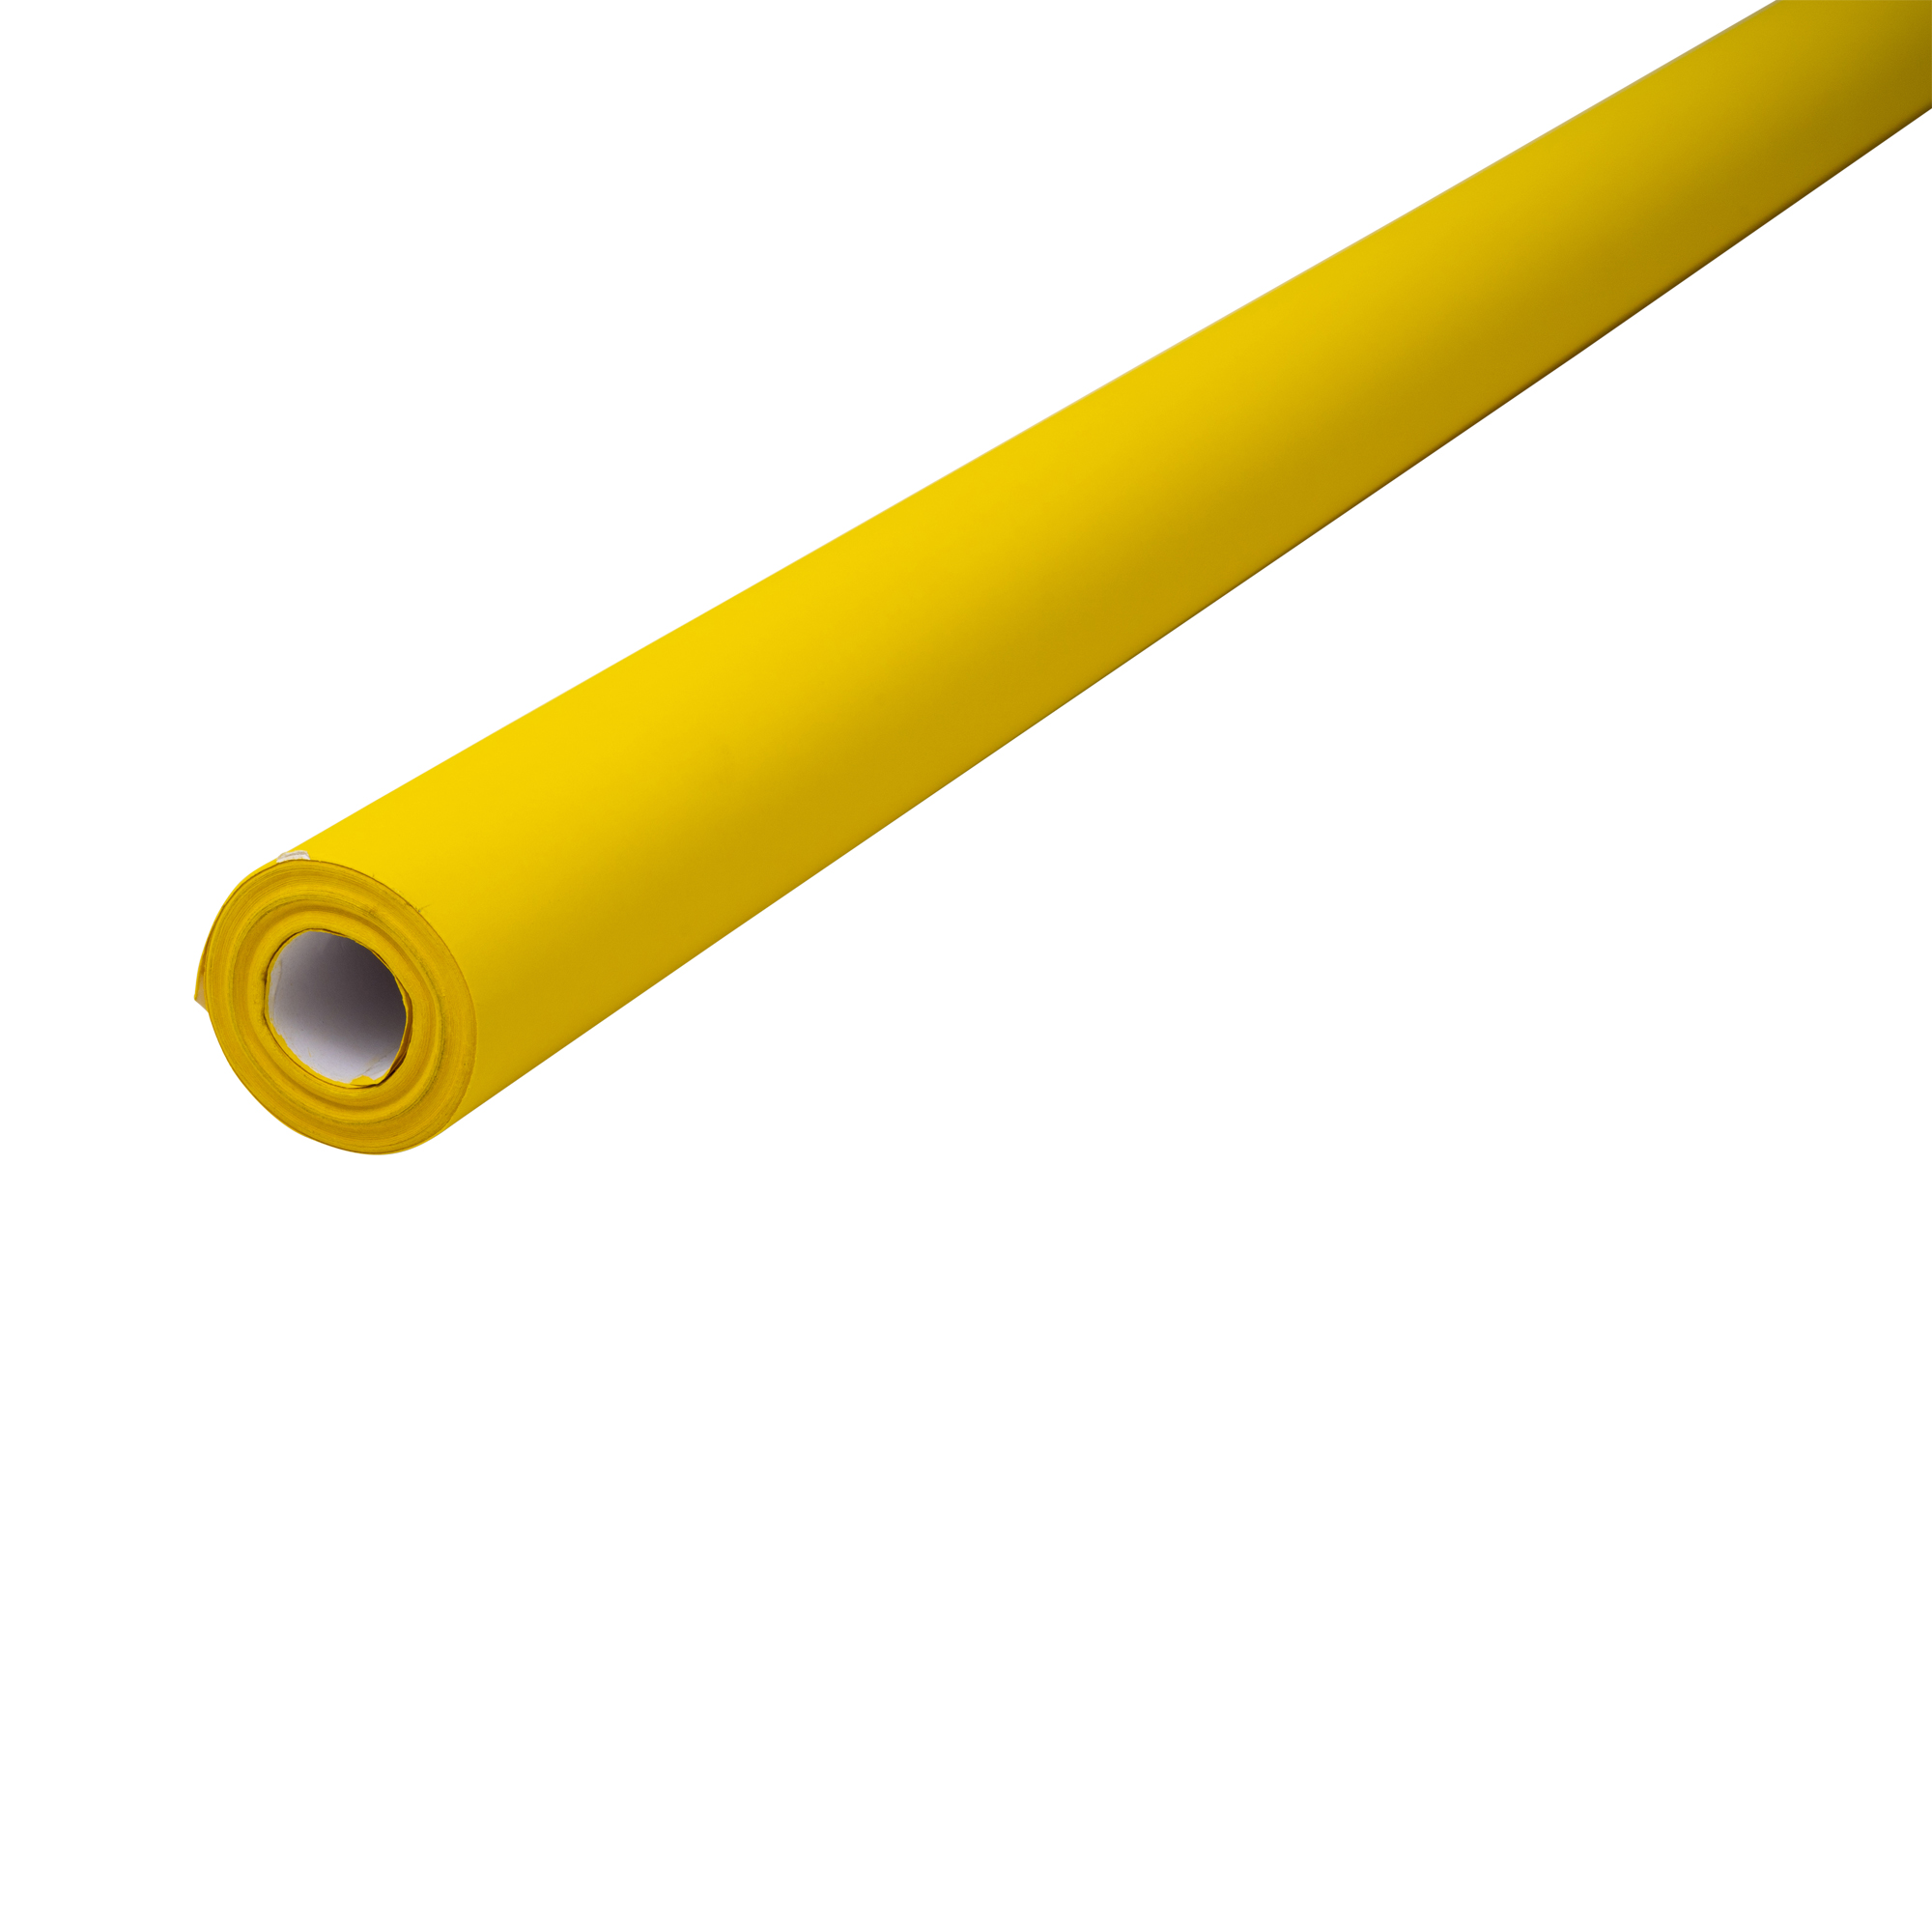 EXTRA WIDE DISPLAY PAPER 15M ROLL Lemon Yellow